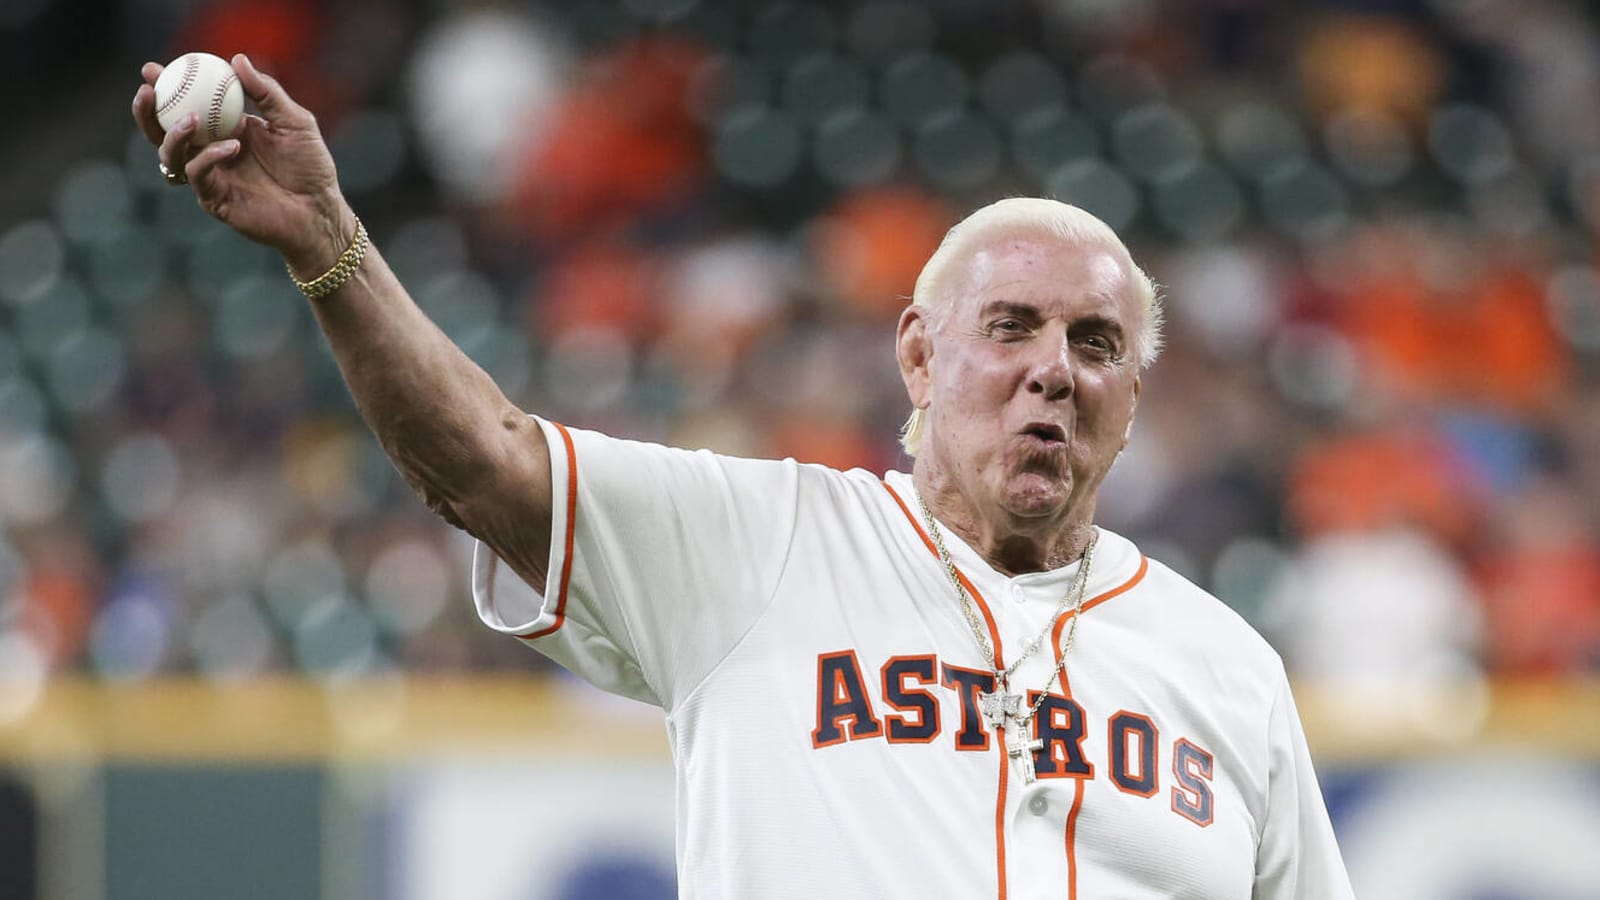 Watch: Wrestling icon Ric Flair, 73, trains for his final match